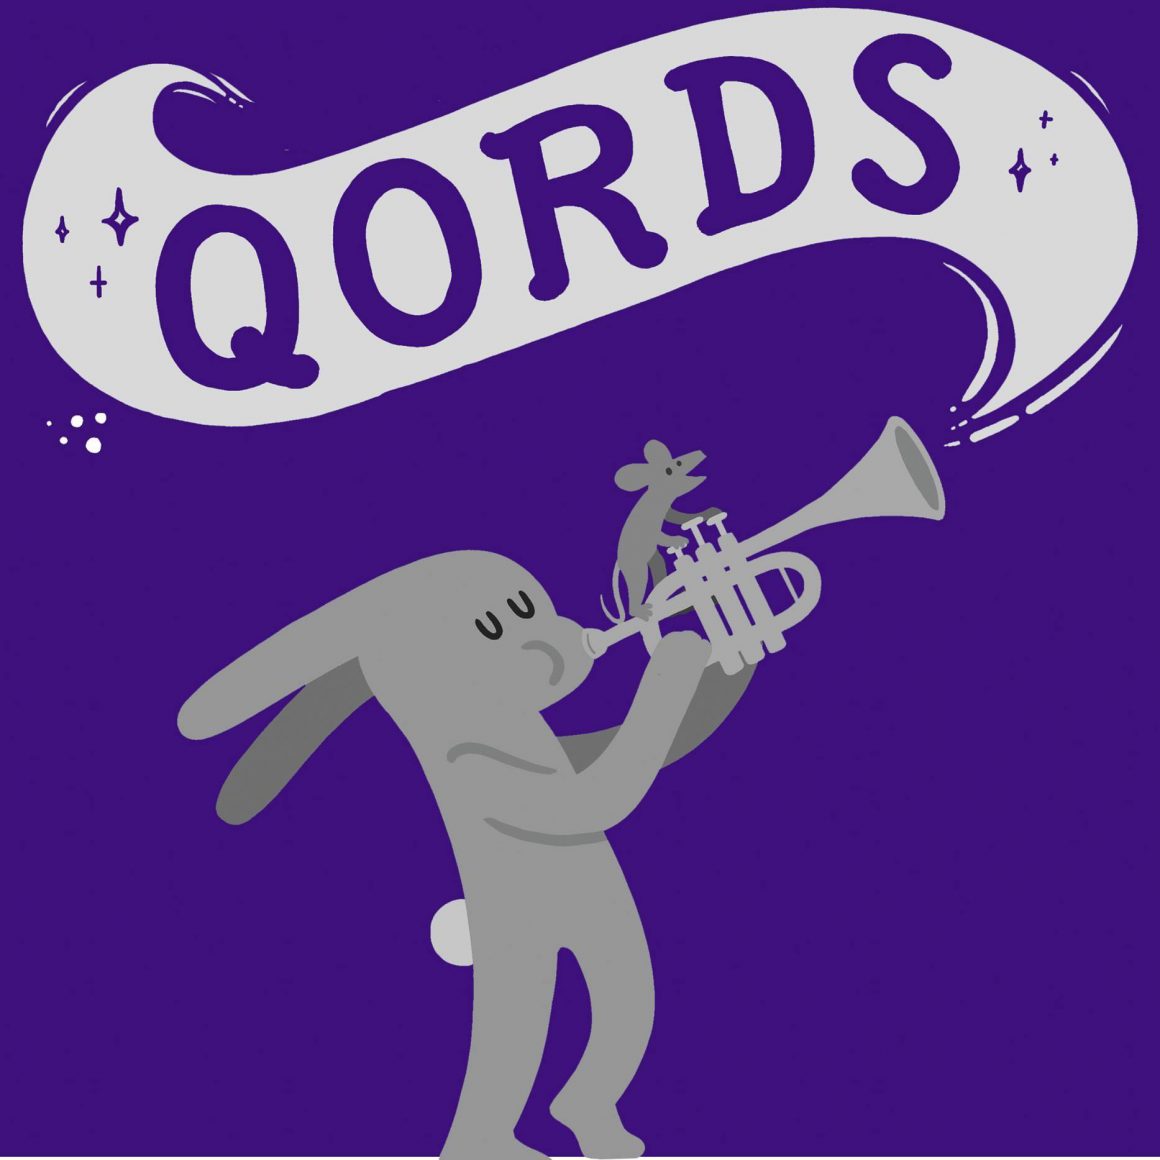 Meet the Beneficiary: QORDS (Queer Oriented Radical Days of Summer